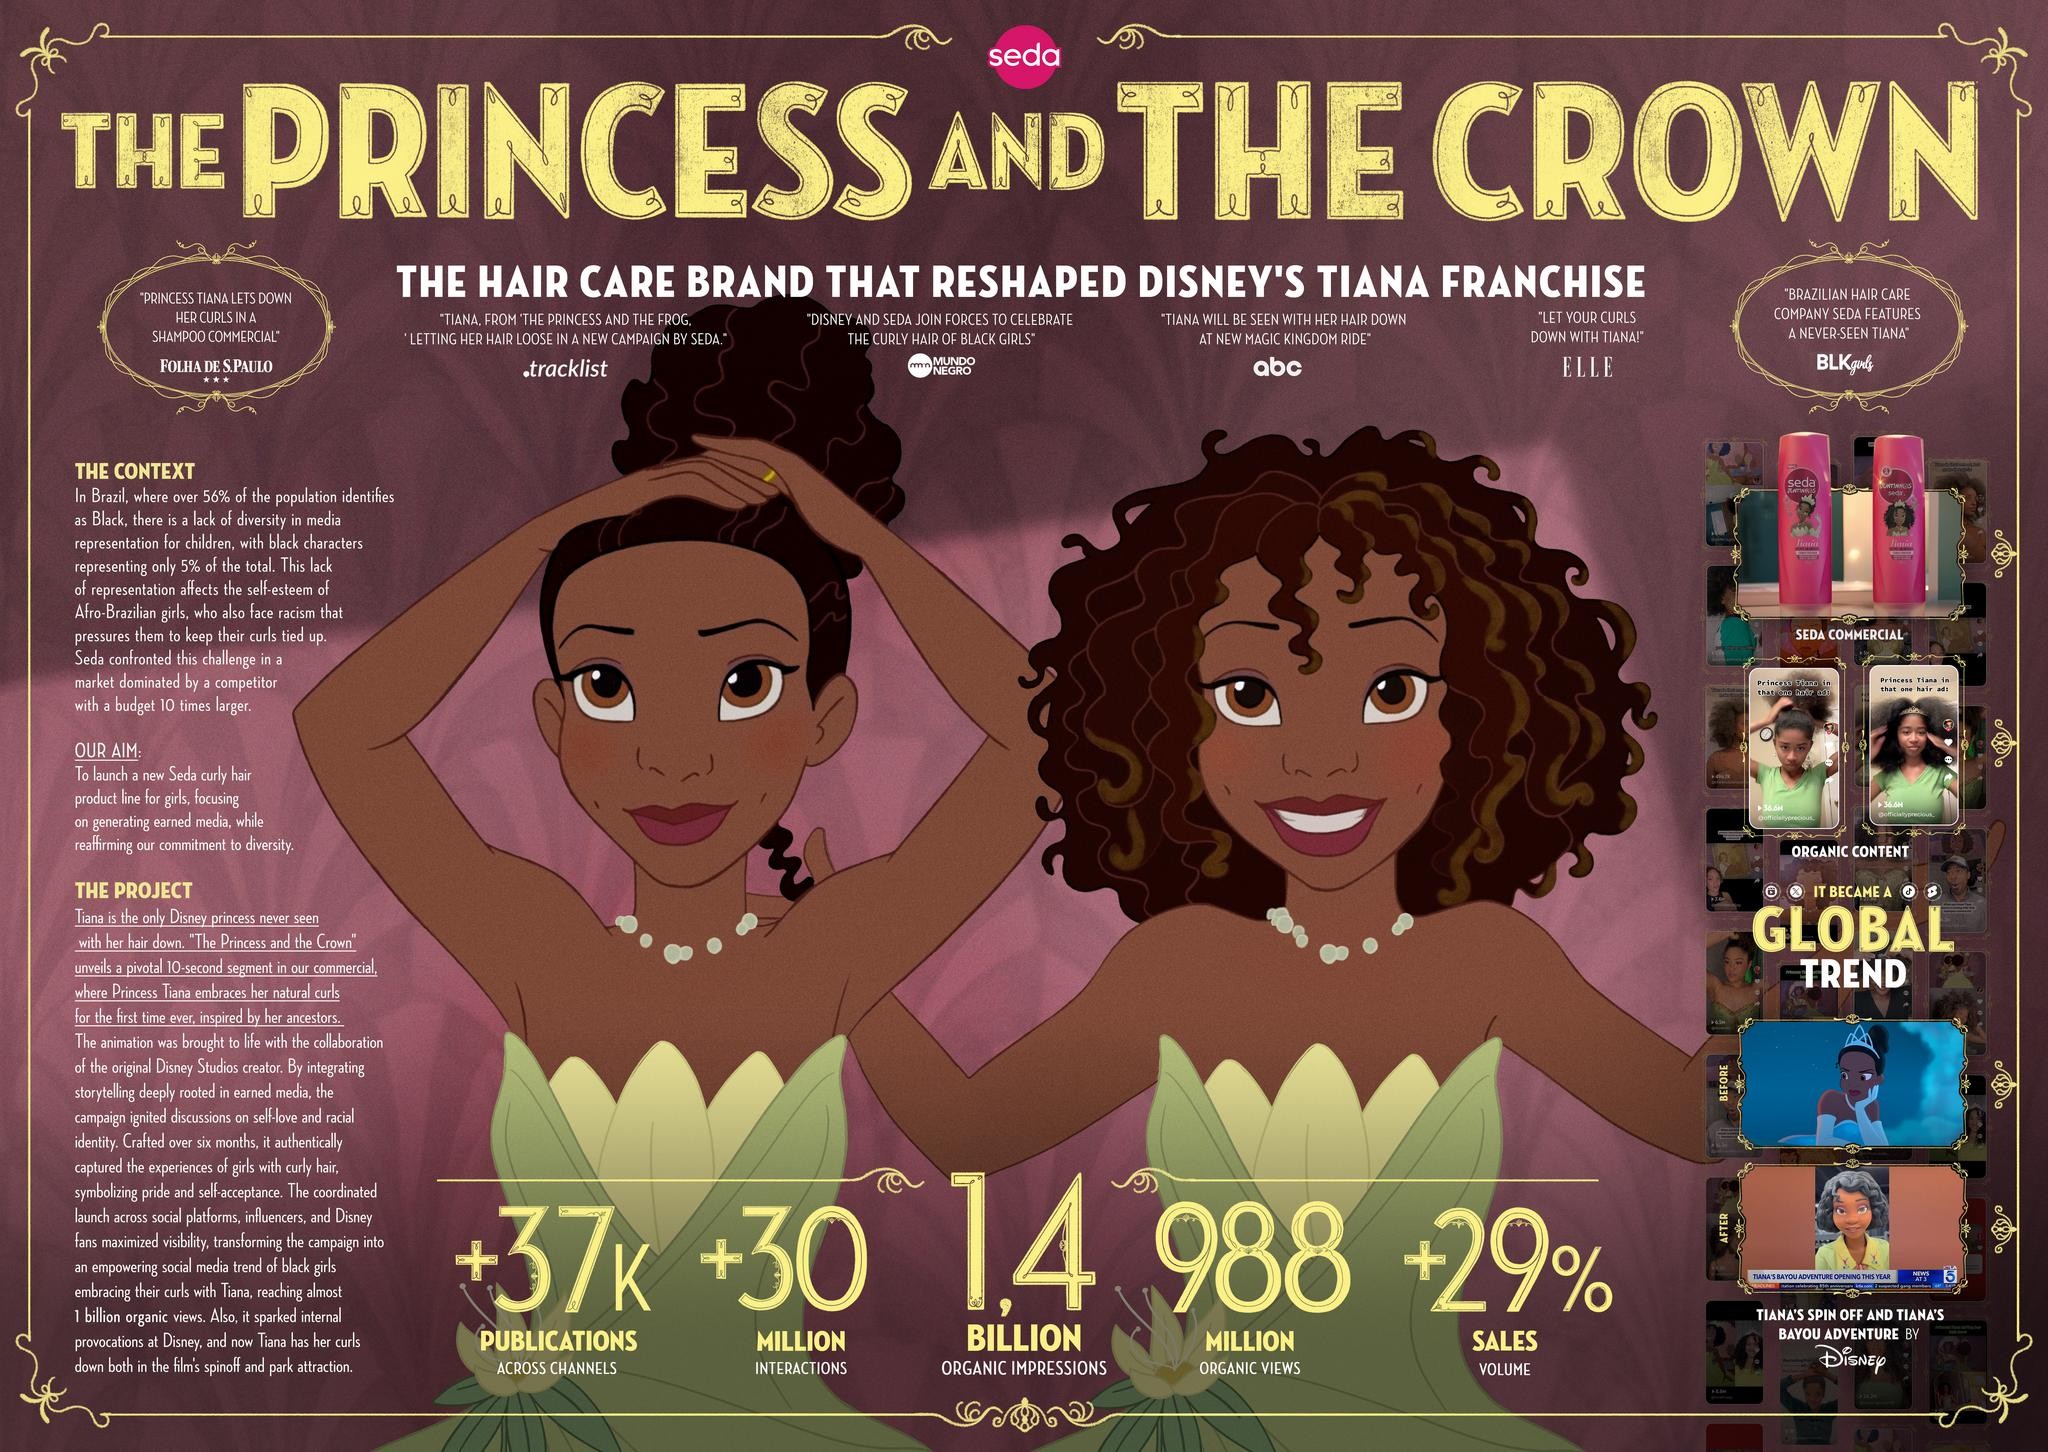 THE PRINCESS AND THE CROWN